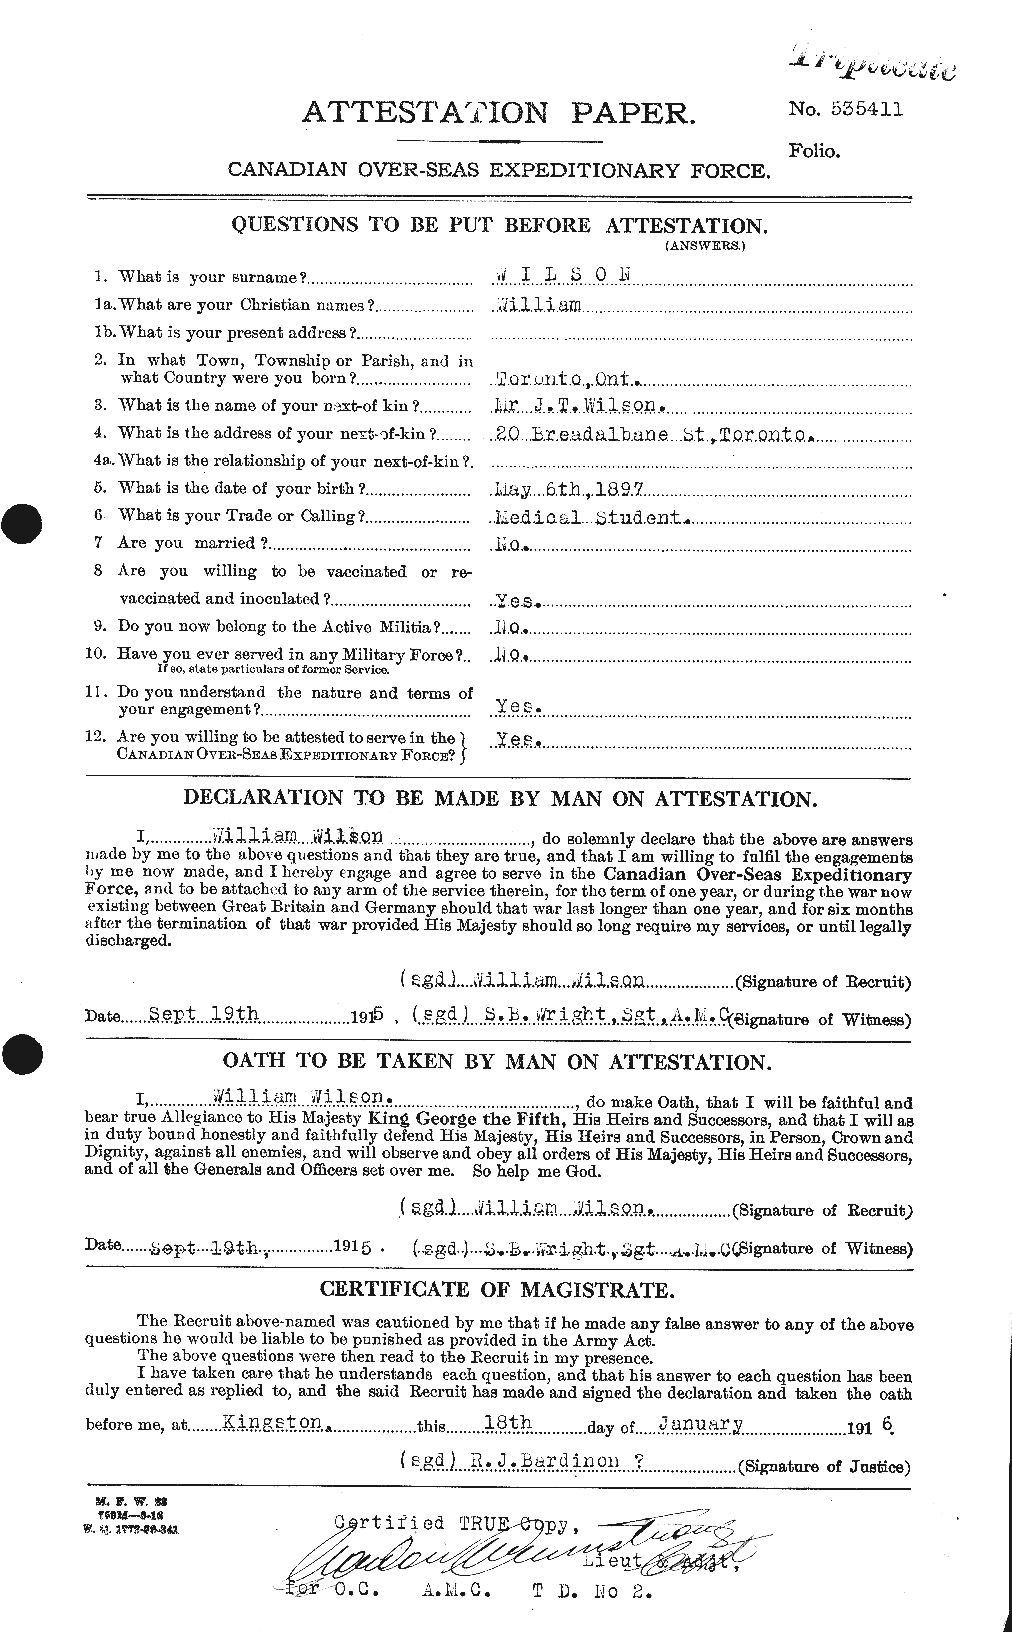 Personnel Records of the First World War - CEF 681877a